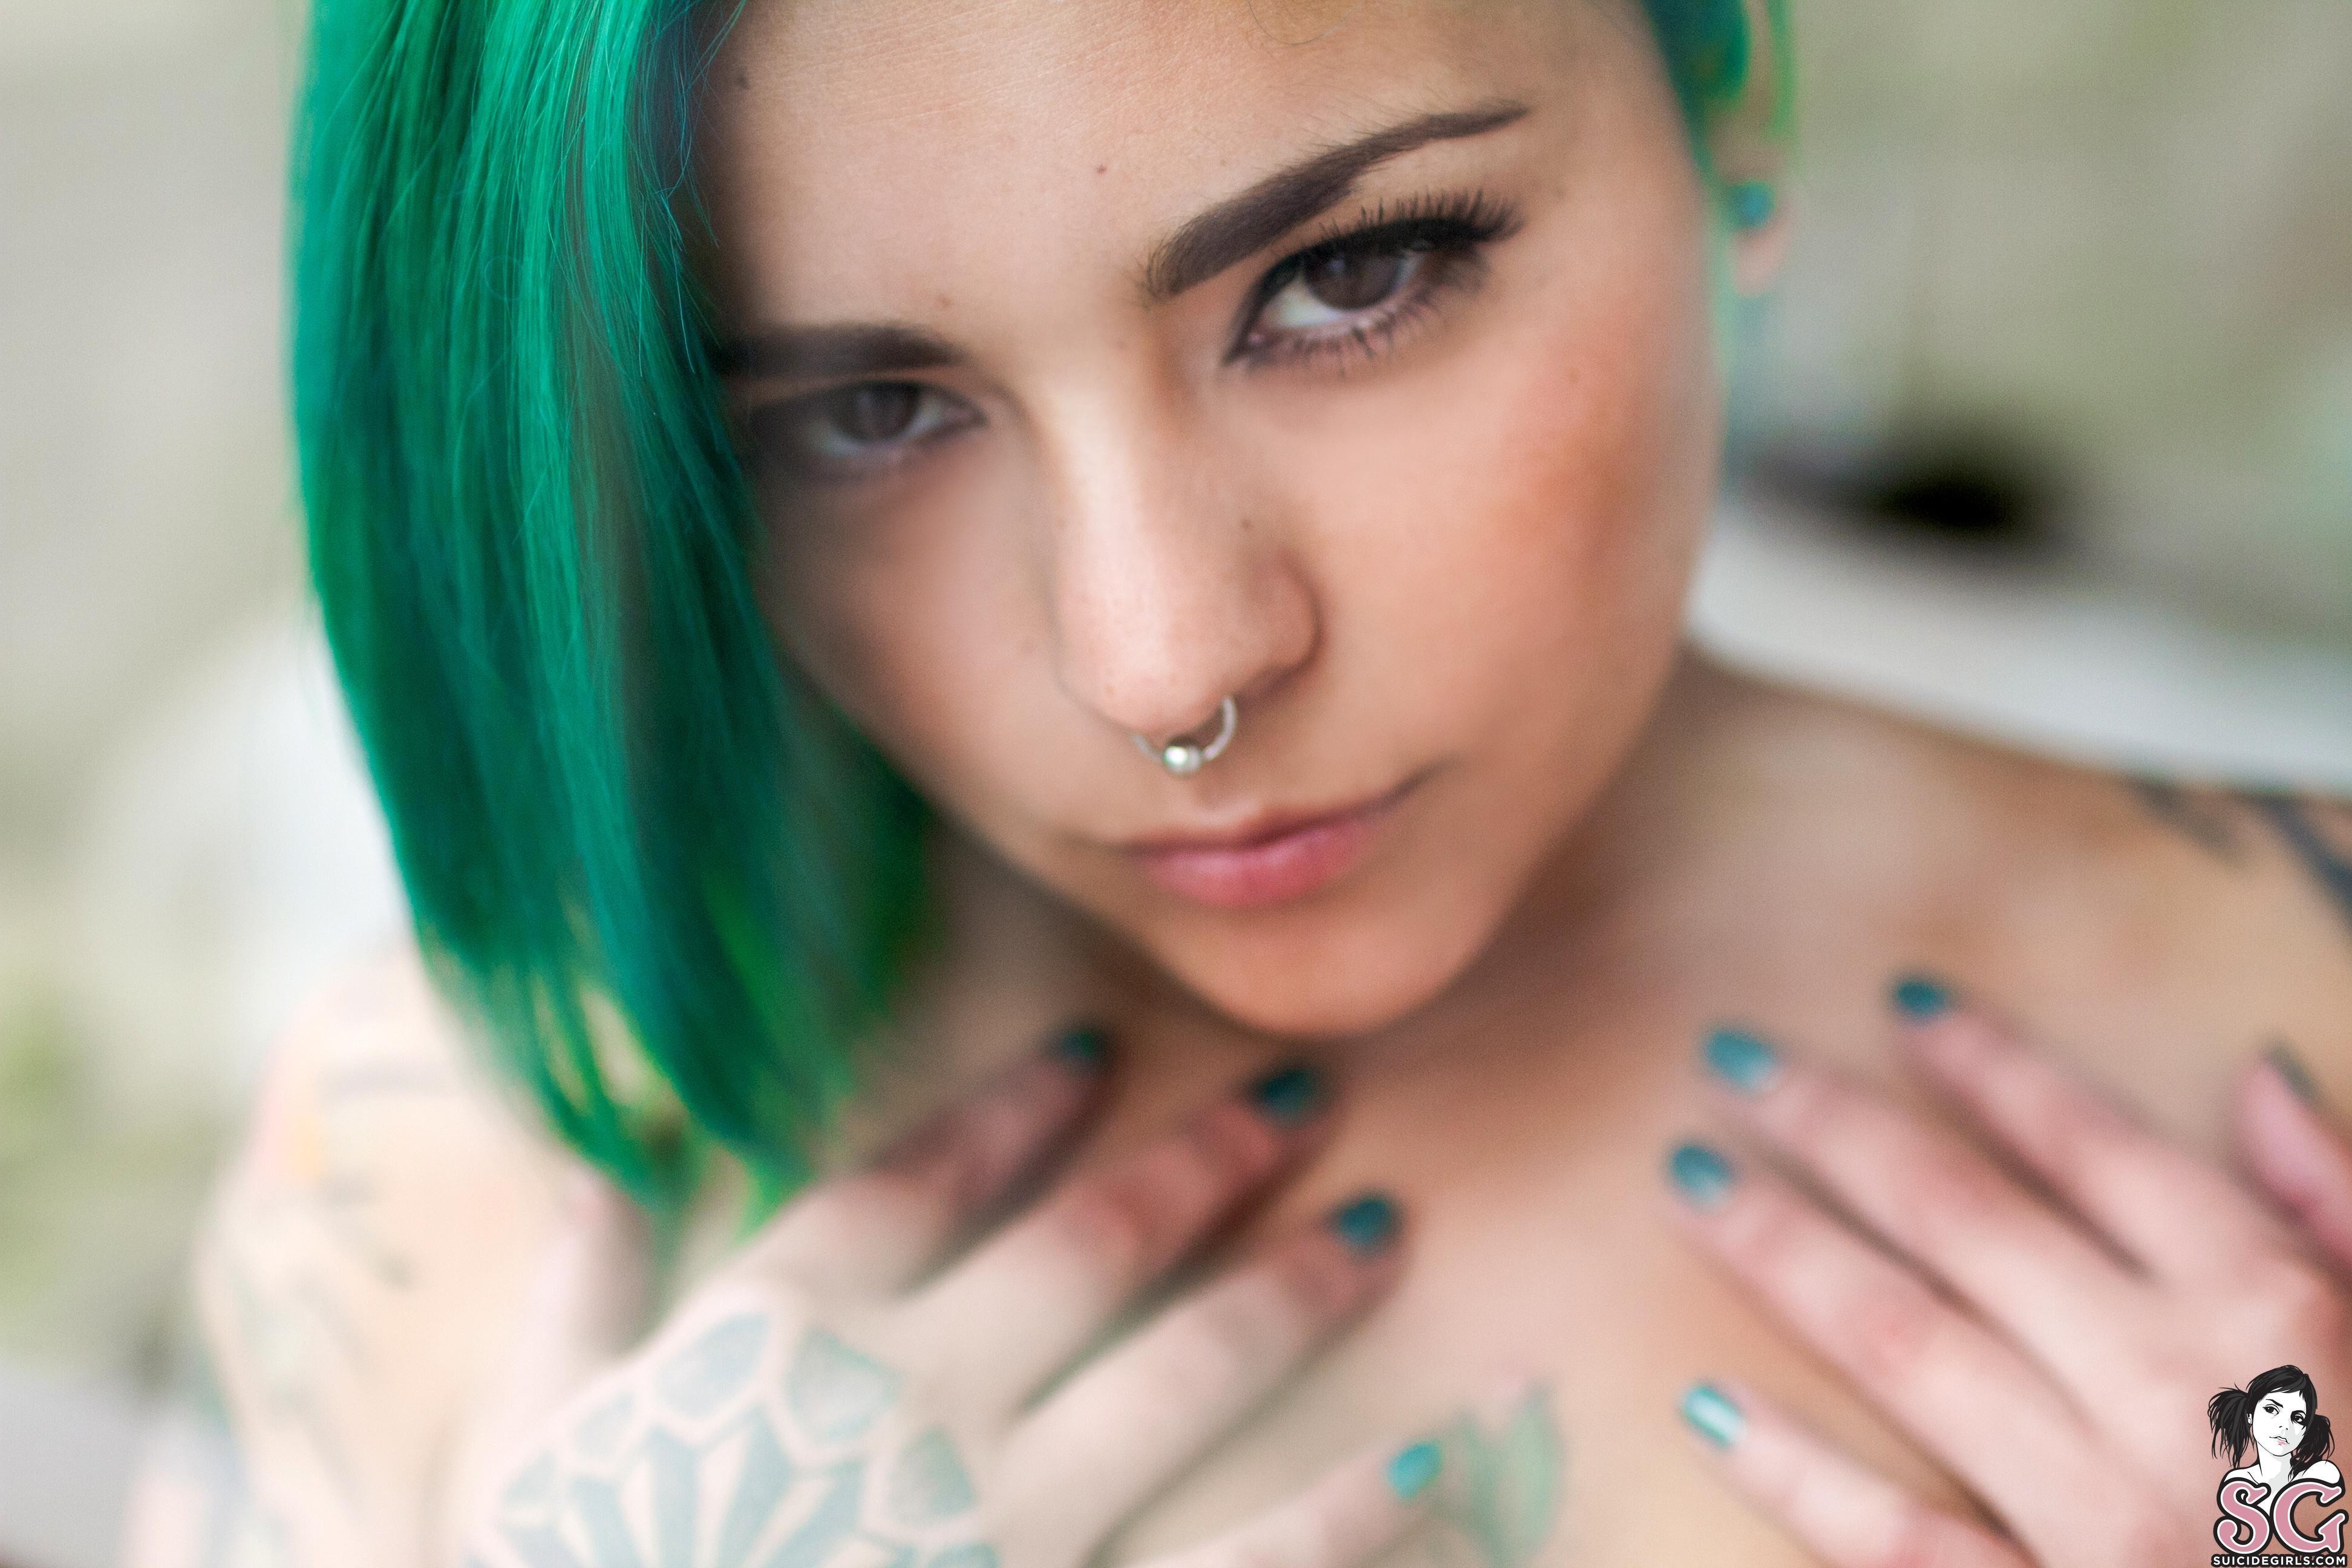 Beautiful Suicide Girl Fe Green Poison 48 HD iPhone Retina Image.